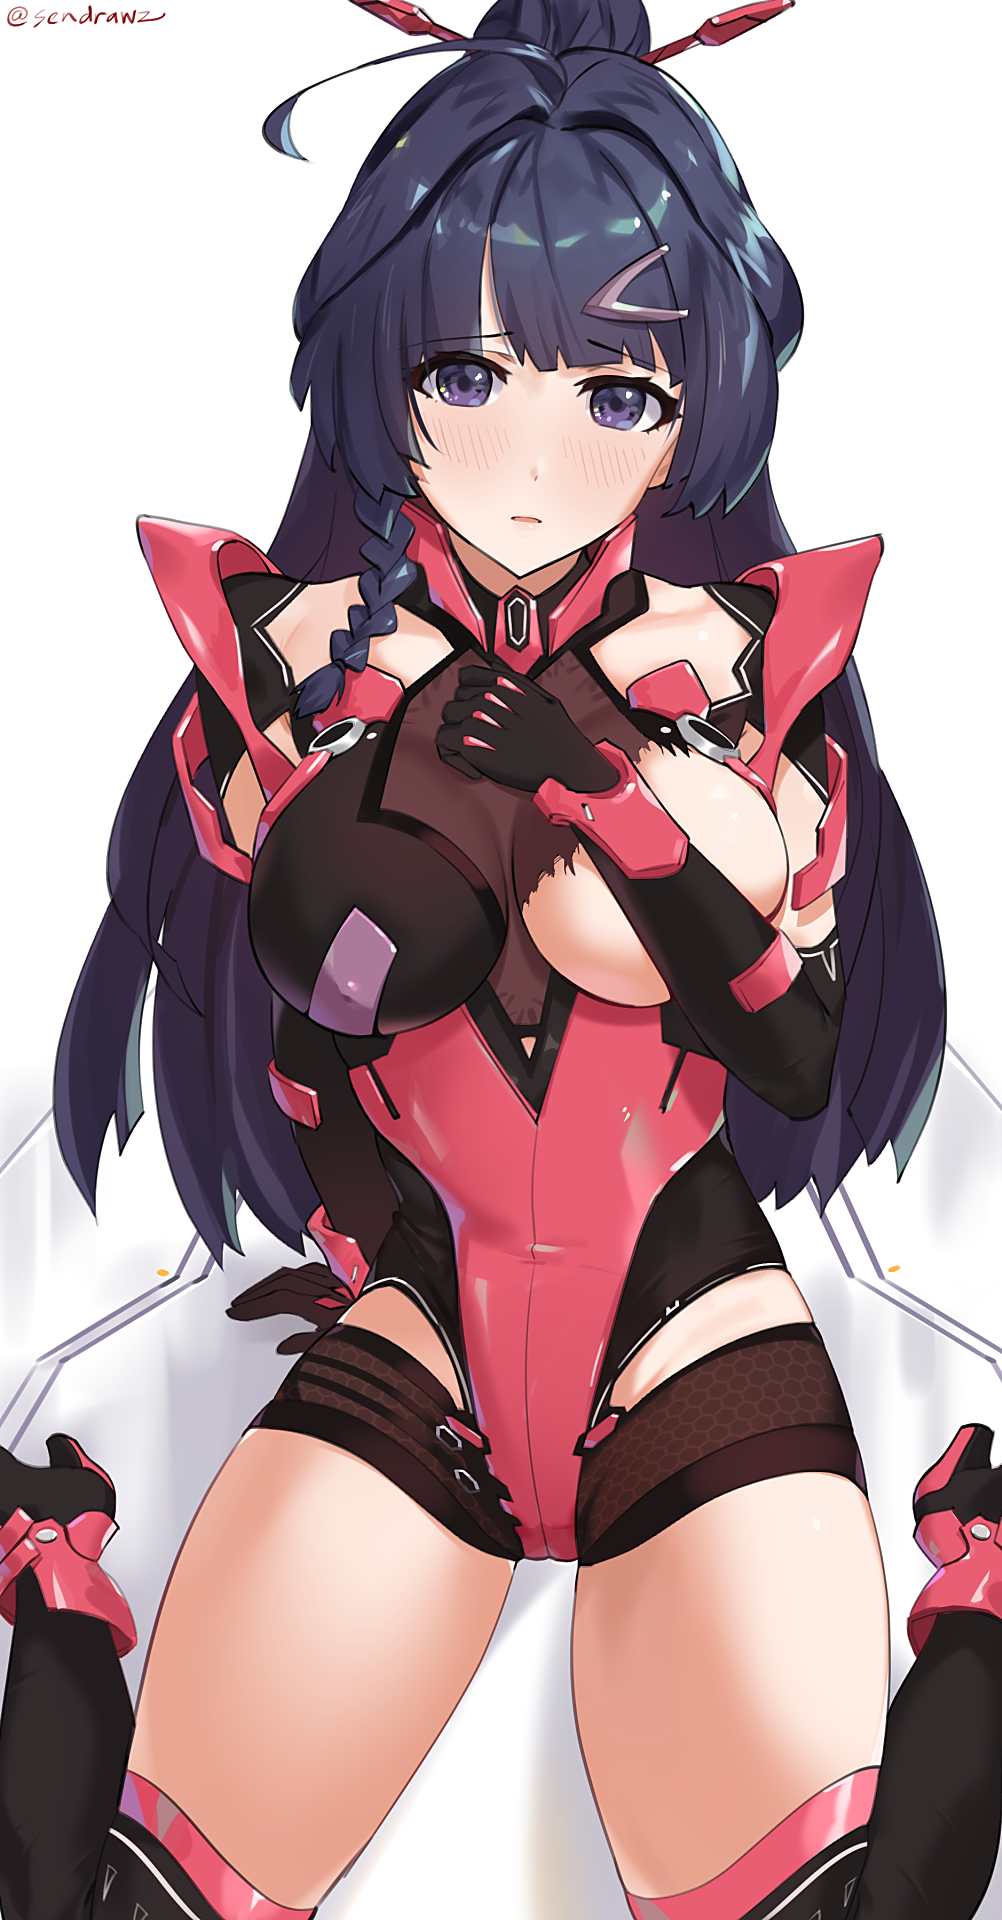 1girl ahoge artist_name blush braid breasts cleavage commentary covered_nipples elbow_gloves eyebrows_visible_through_hair gloves hair_ornament hairpin hand_on_own_chest high_heels highres honkai_impact kneeling long_hair looking_at_viewer open_mouth pink_armor ponytail purple_hair raiden_mei sendrawz side_braid solo thigh-highs thighs torn_clothes violet_eyes white_background